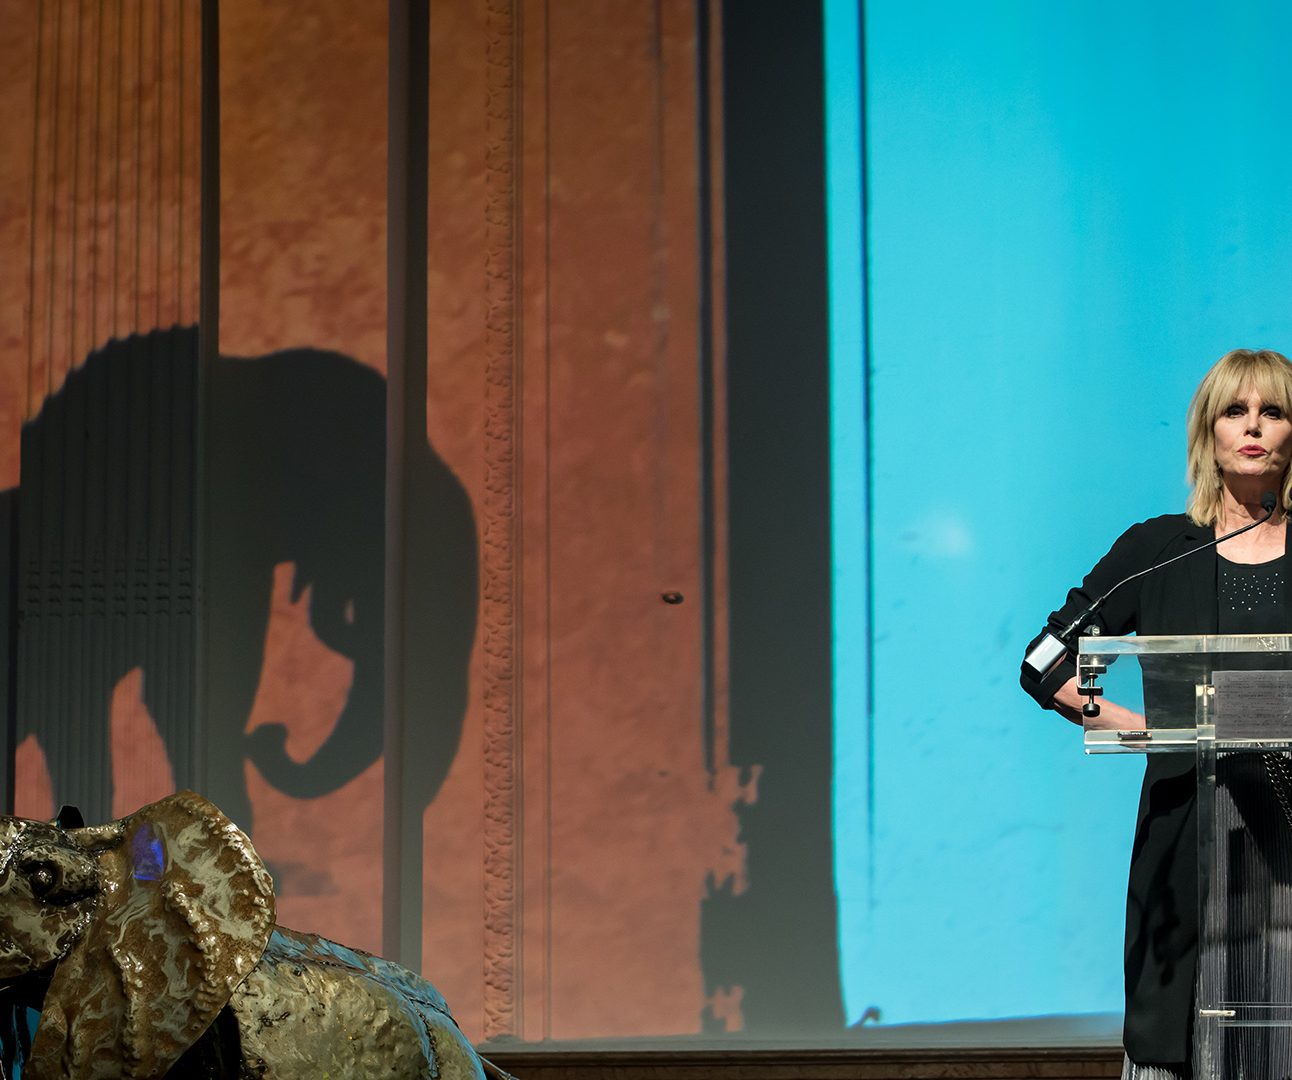 Joanna Lumley stands at a podium, while the shadow of an elephant puppet is on the wall